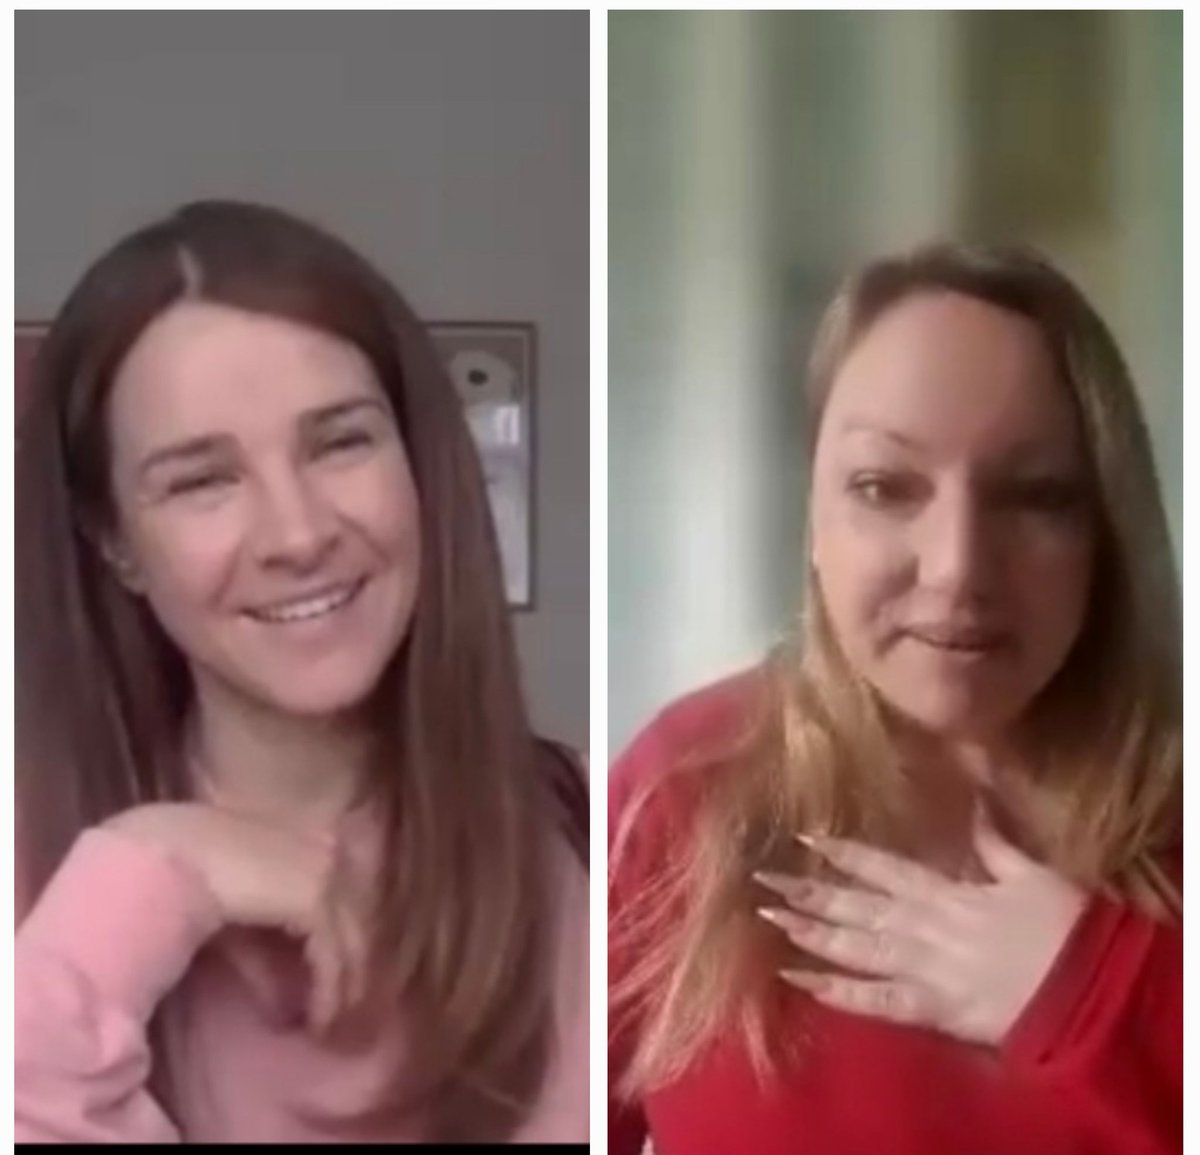 For #maternalmentalhealthawarenessweek , watch @mrs_izzyjudd and I discussing Rediscovering Yourself After Having A Baby over on the @PMHPUK Instagram: instagram.com/tv/C6b9MOshVor… #maternalmhmatters #MaternalMentalHealth #perinatalmentalhealth #Rediscoveringyou #mmhaw #mmhaw24